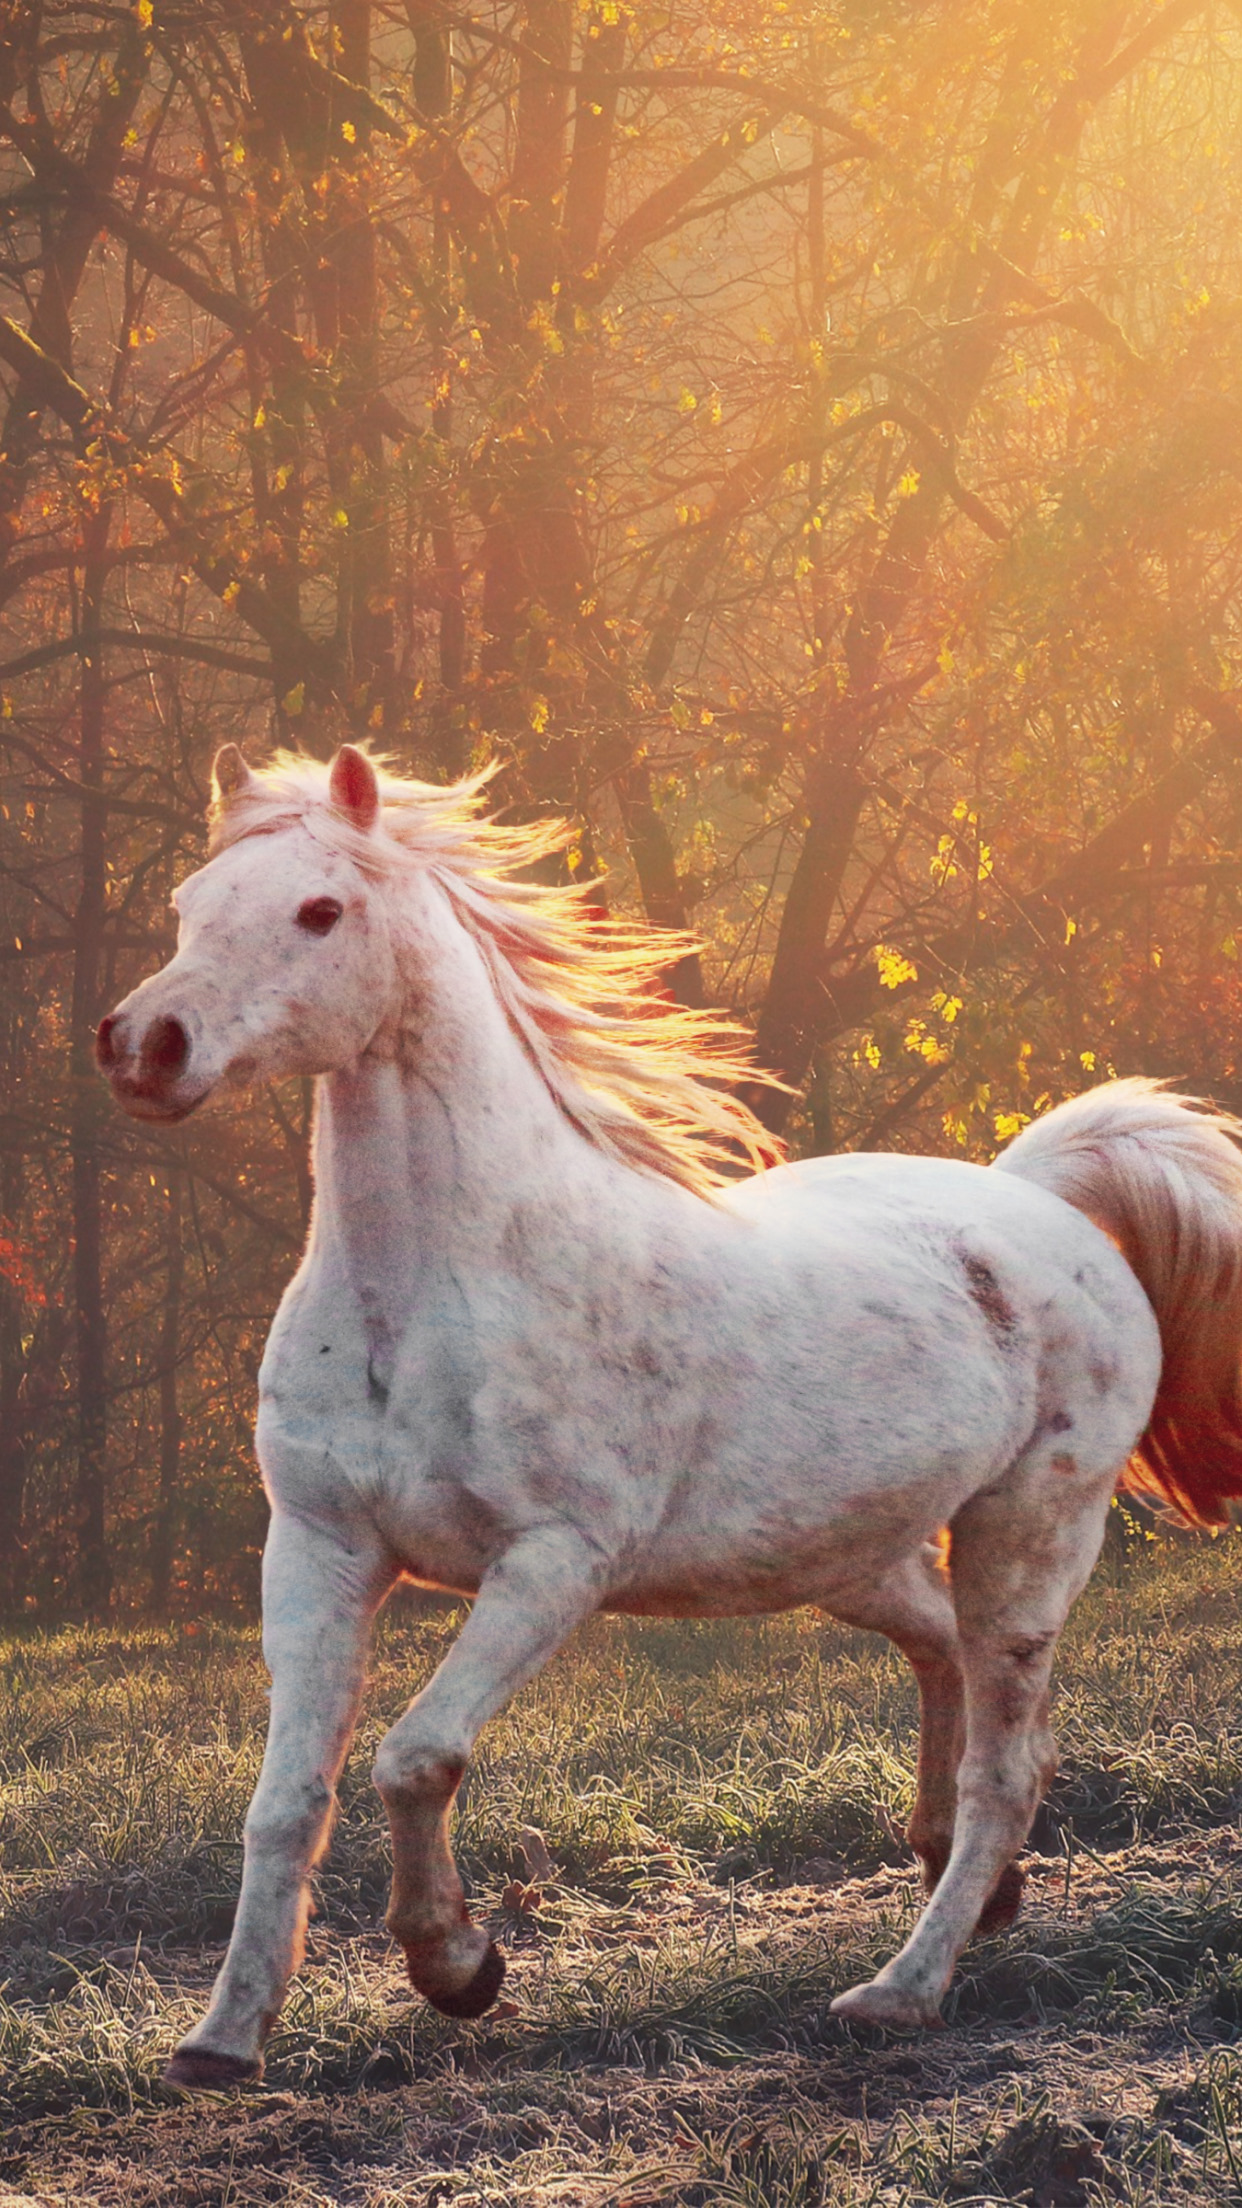 Download wallpaper: Horse running in the morning lights 1242x2208